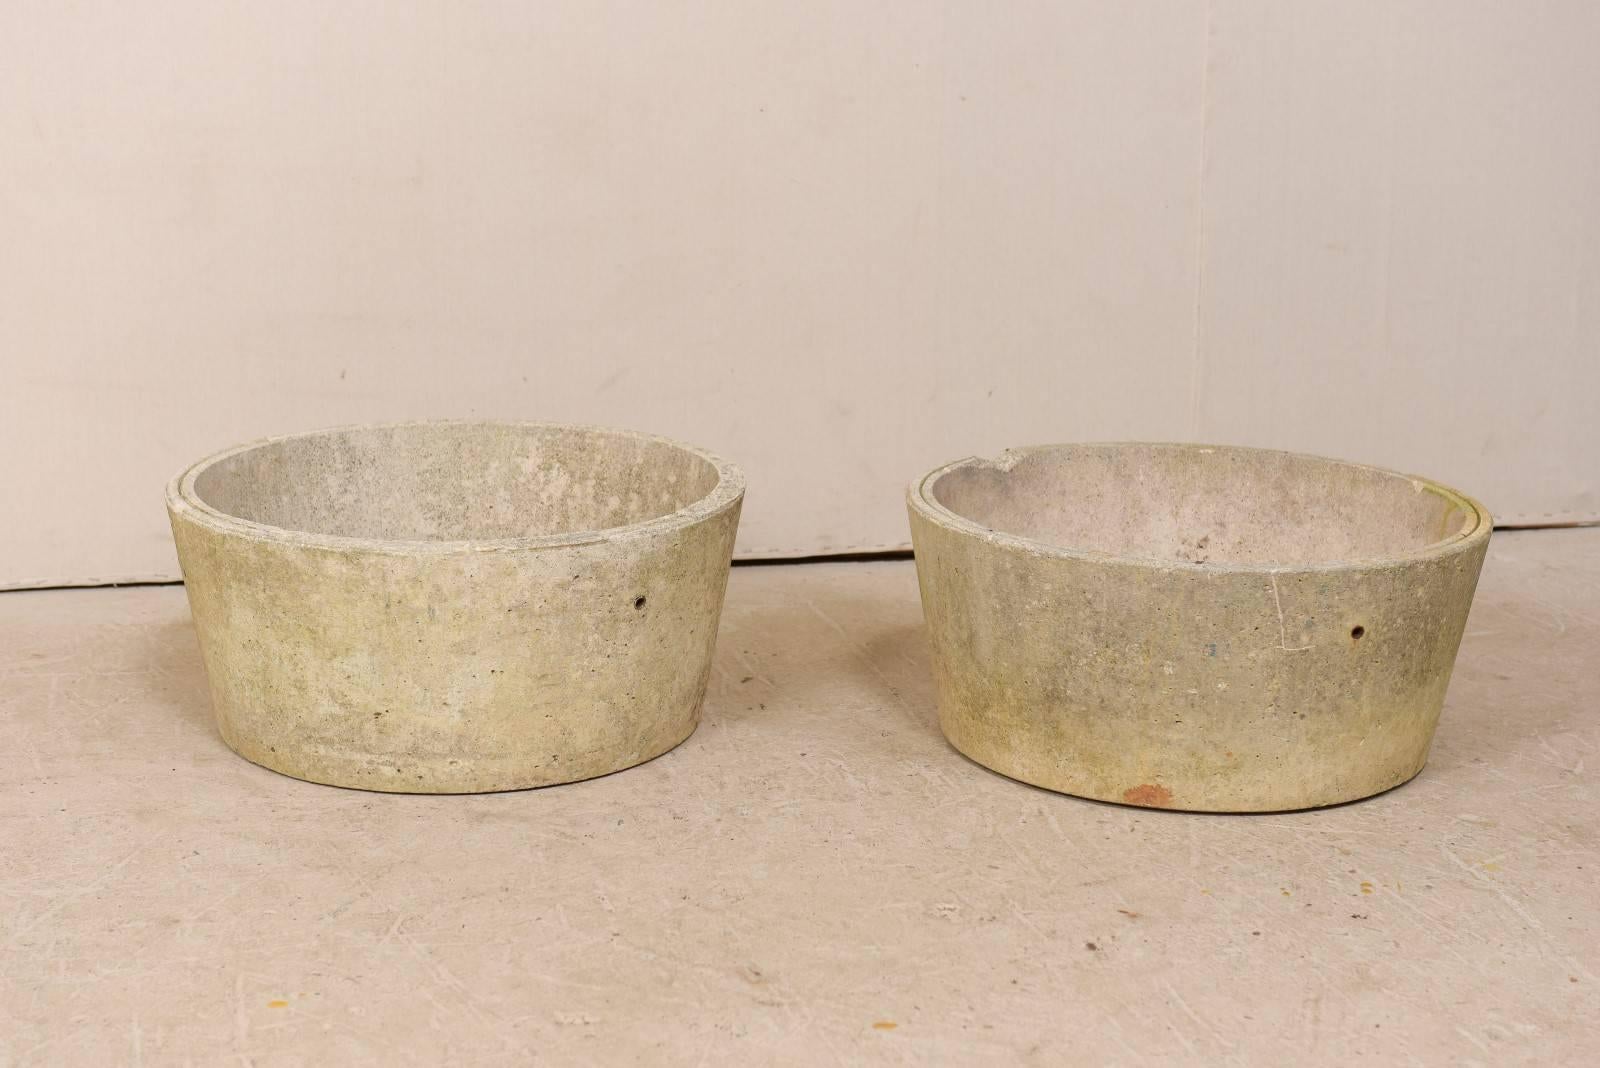 A pair of French cast concrete pots from the mid-20th century. This pair of vintage French pots, with their simplistic designs, feature round-shaped bodies which have a subtle taper towards their base. The pots are over 2 ft wide, and each have a